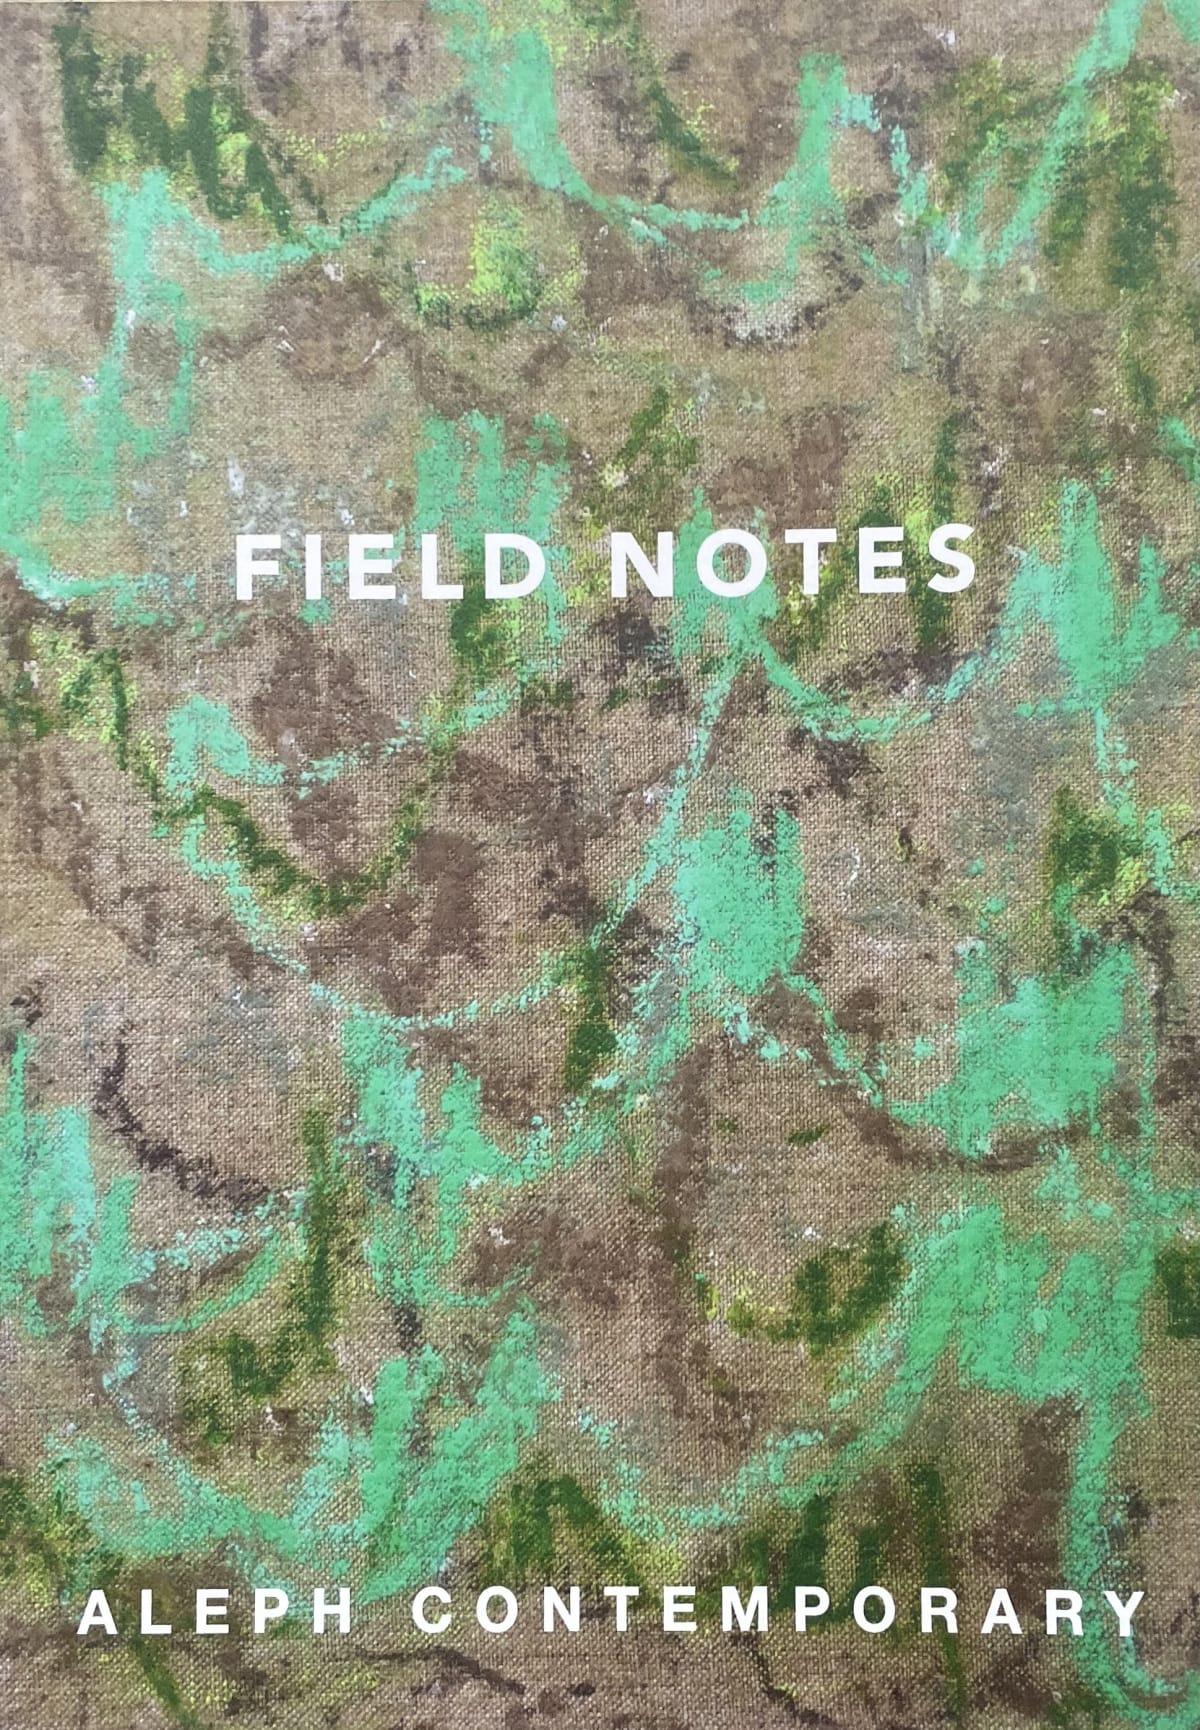 Field Notes: Anna van Oosterom, Jacopo Dal Bello, Andrew Hewish